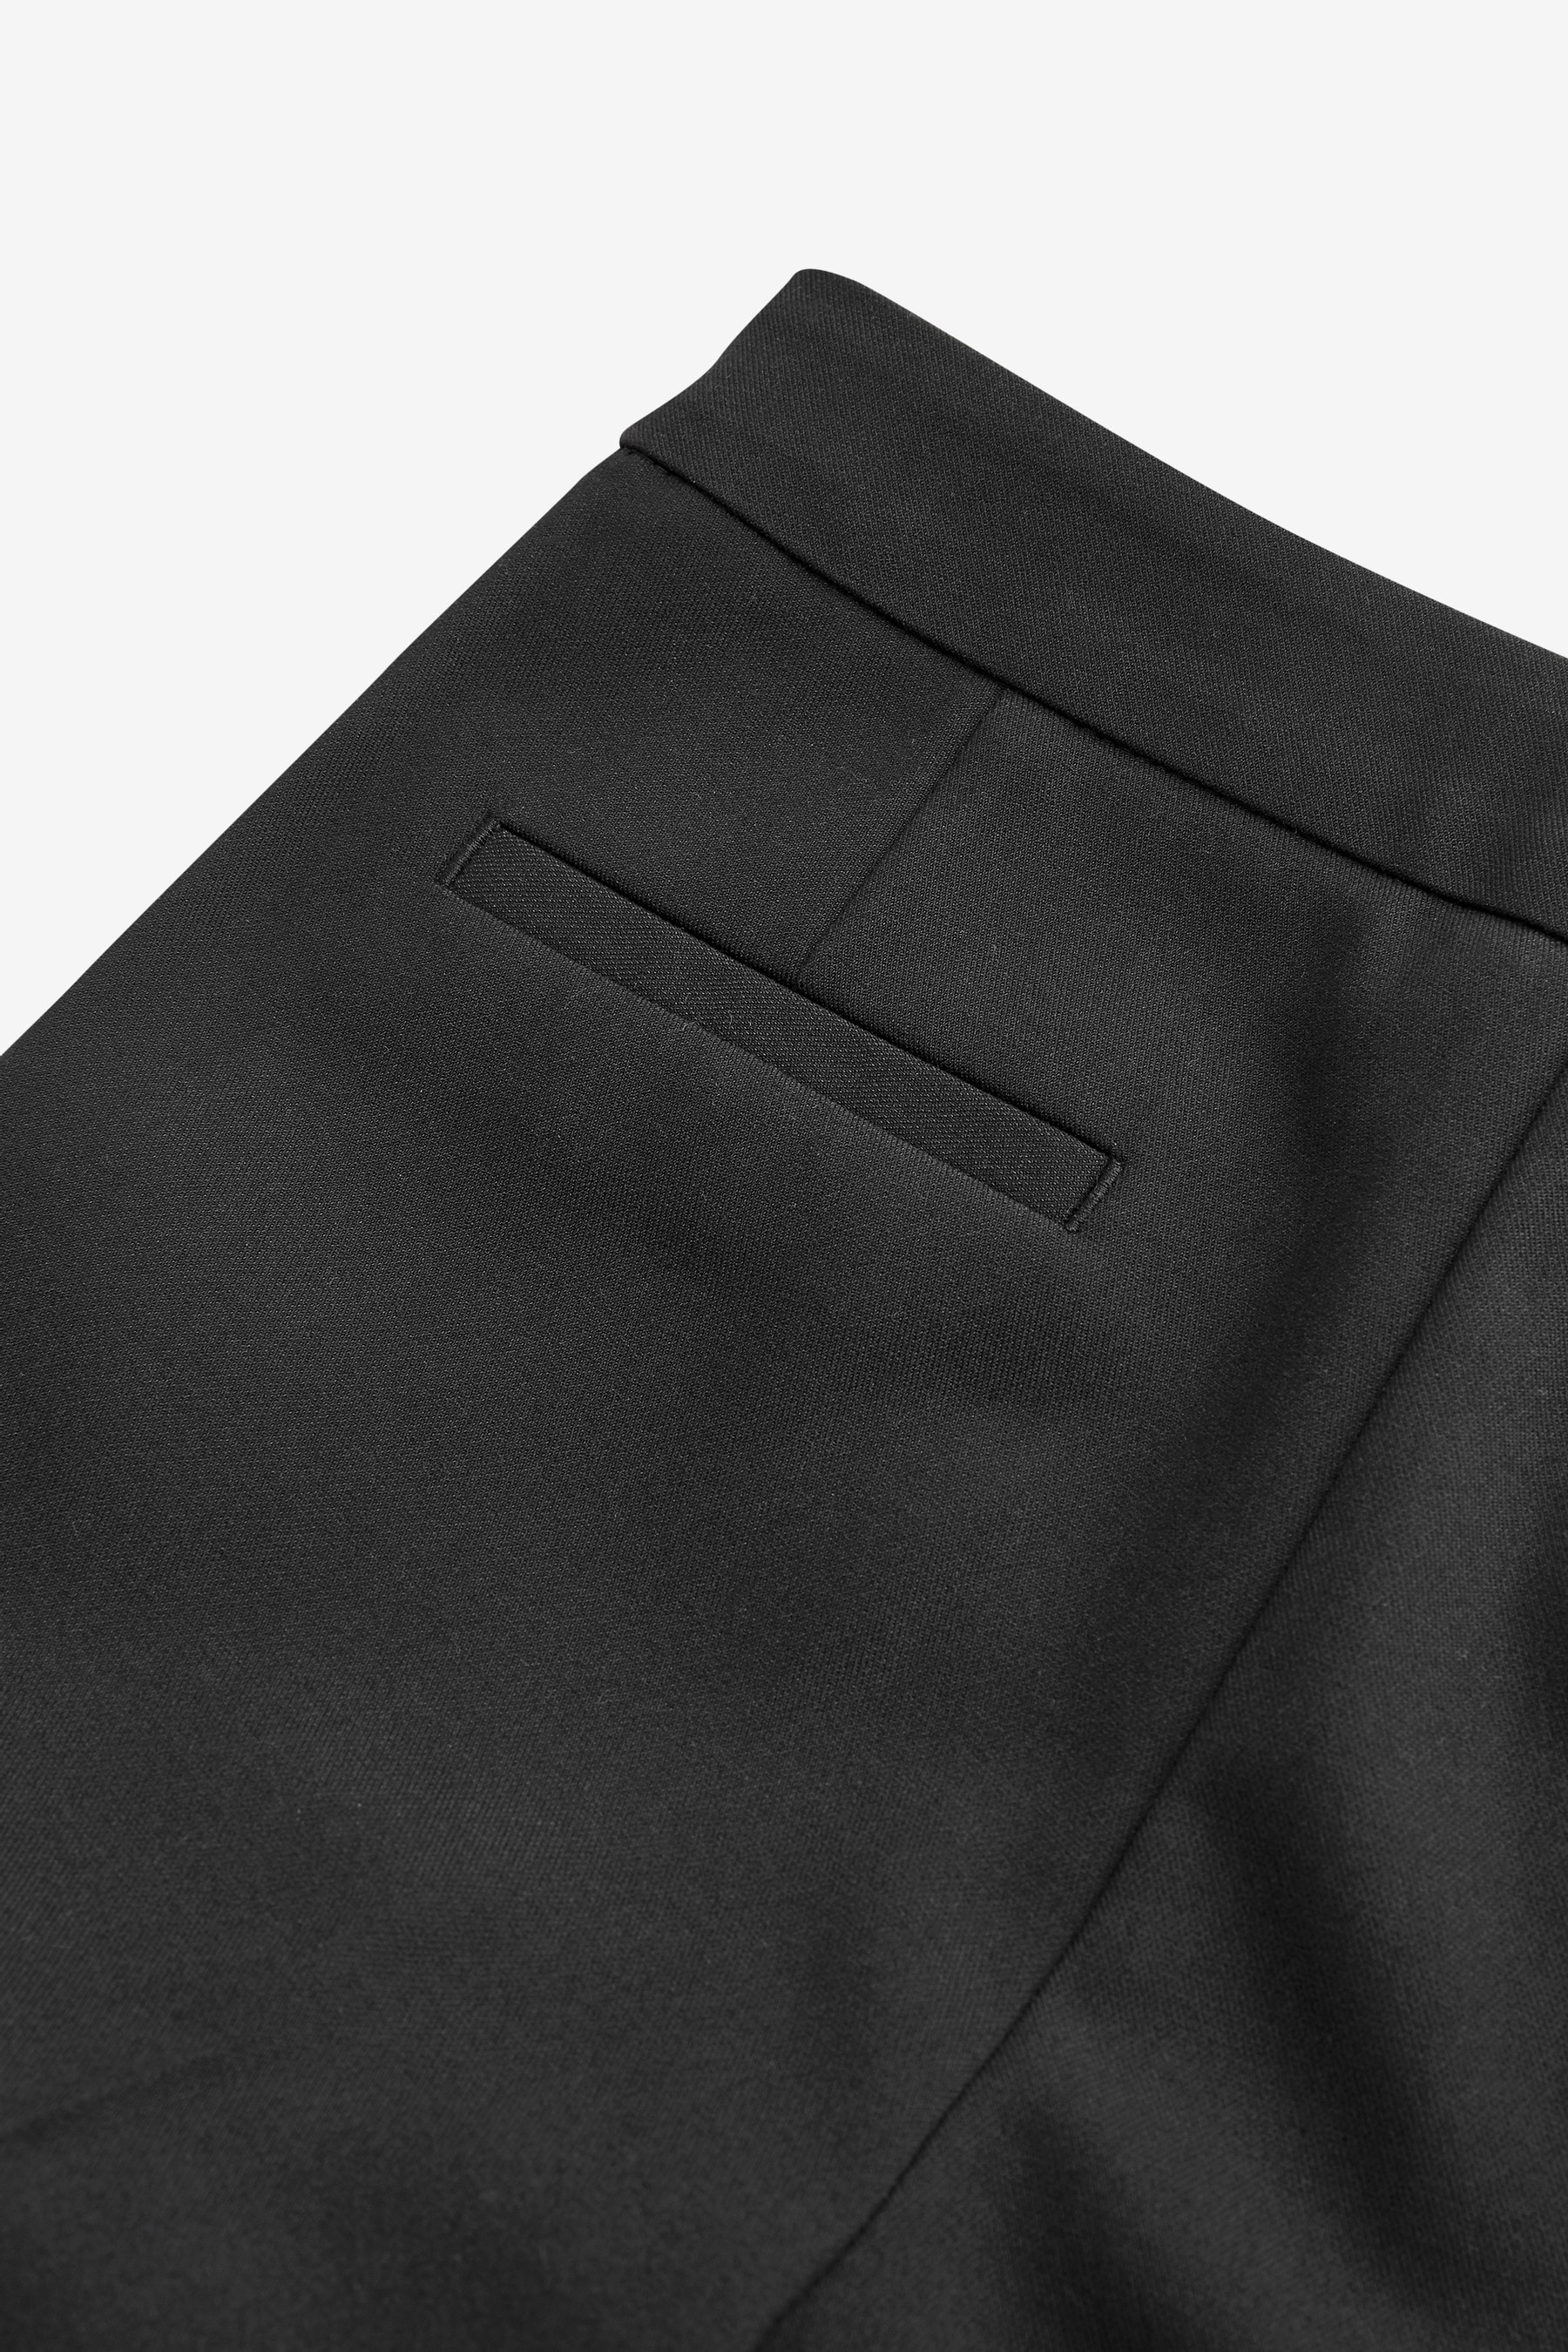 Buy Black Plain Front School Trousers (3-18yrs) from the Next UK online ...